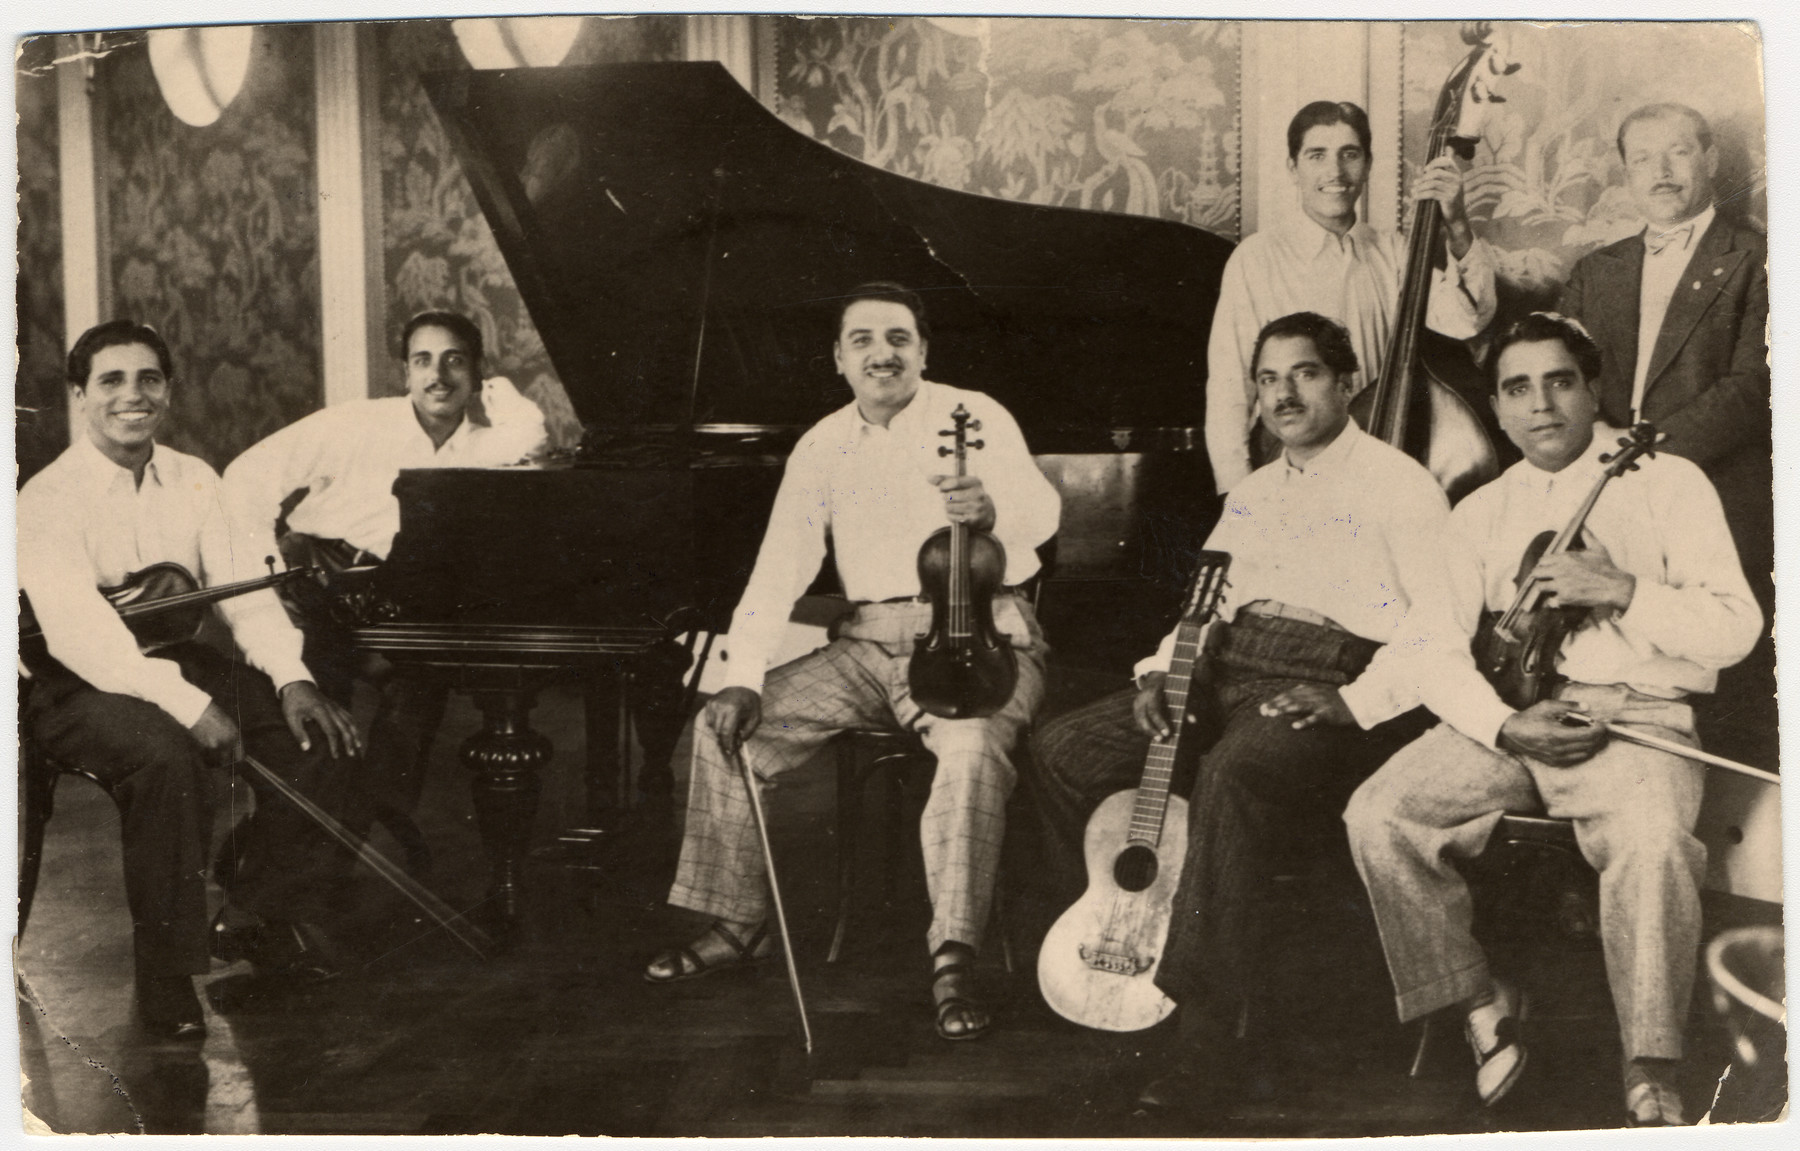 Members of a French-Hungarian Romani musical band pose for a photograph with their instruments.  

Pictured from left to right are: Gabriel Reinhardt (donor's father), Benjamin (donor's uncle), Johan (donor's uncle), a cousin, Ben (donor's uncle), Josef (donor's uncle) and unknown [maybe another cousin].  The band was banned and all its members were sterelized in Wuerburg.